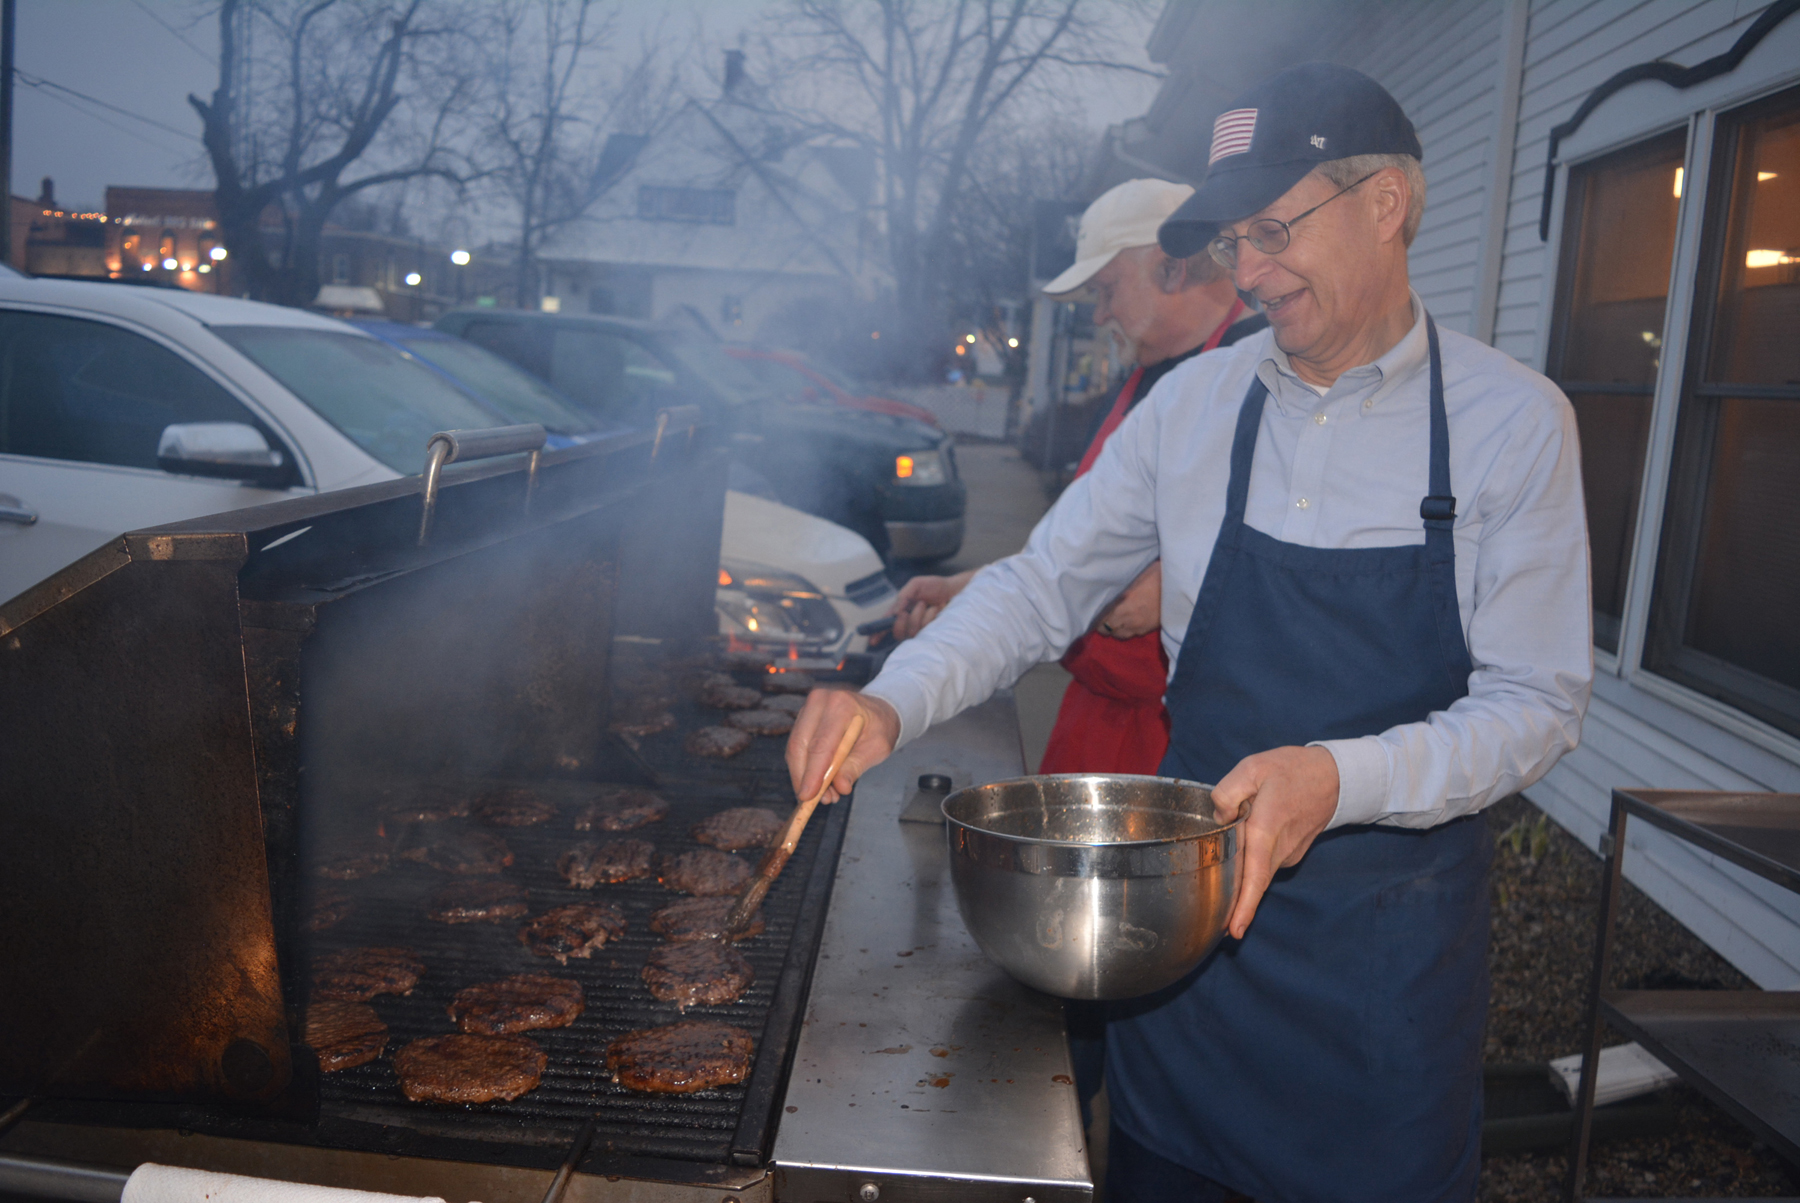 Grilling up hamburgers for hungry guests at Lake Orion United Methodist Church is Community Meals volunteer Clint Syverson, of Oakland Township. Photo by C.J. Carnacchio.